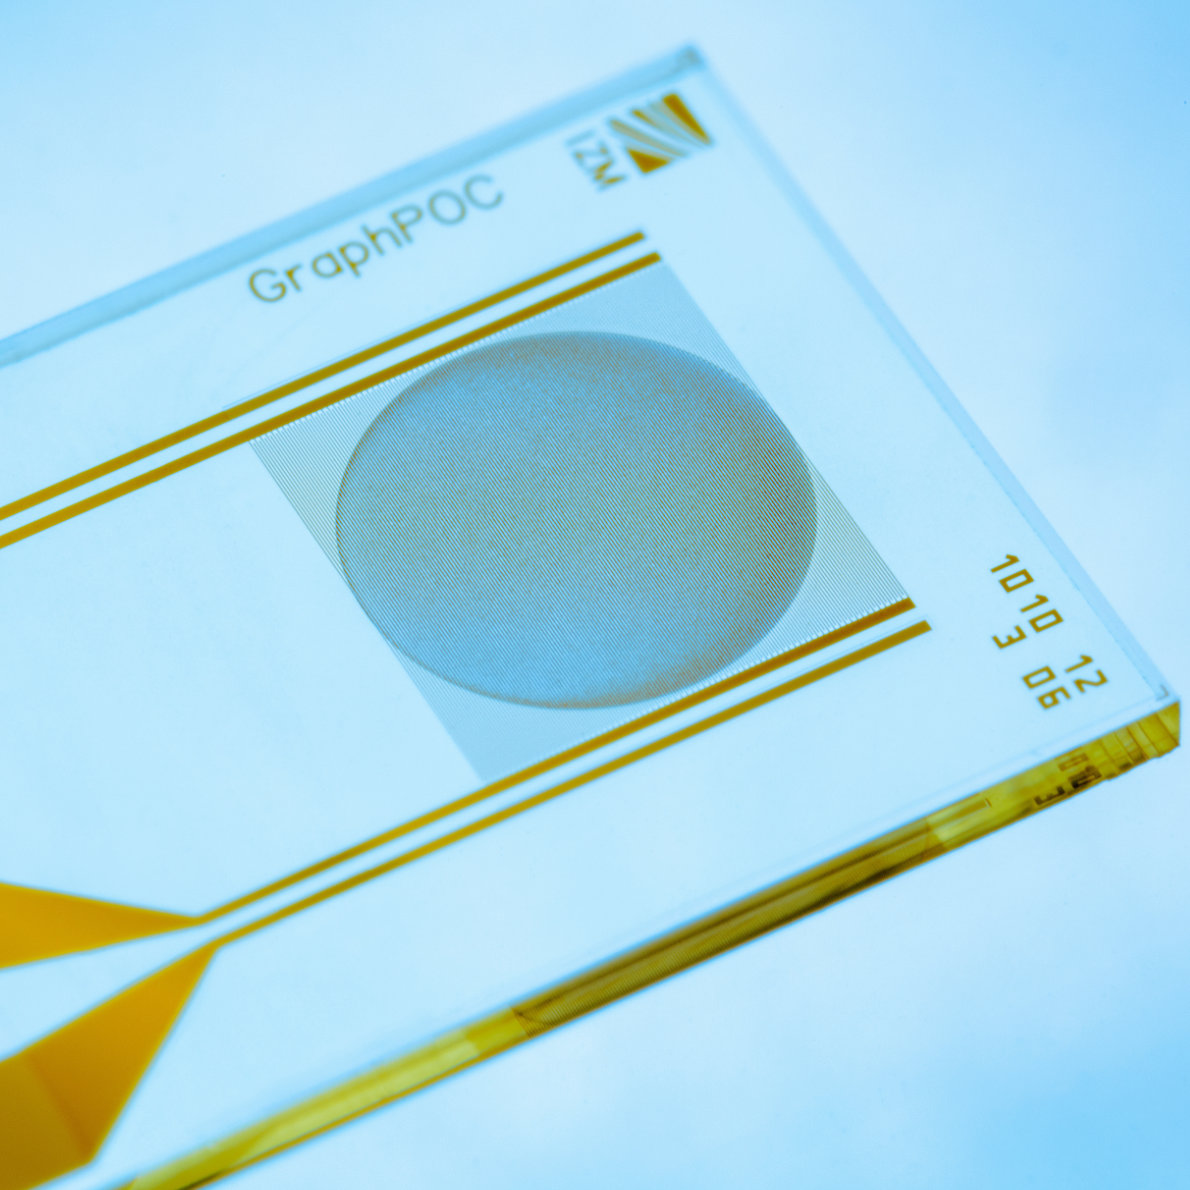 image - Fraunhofer IZM | Volker Mai - researchers develop a graphene oxide-based rapid test to detect infections